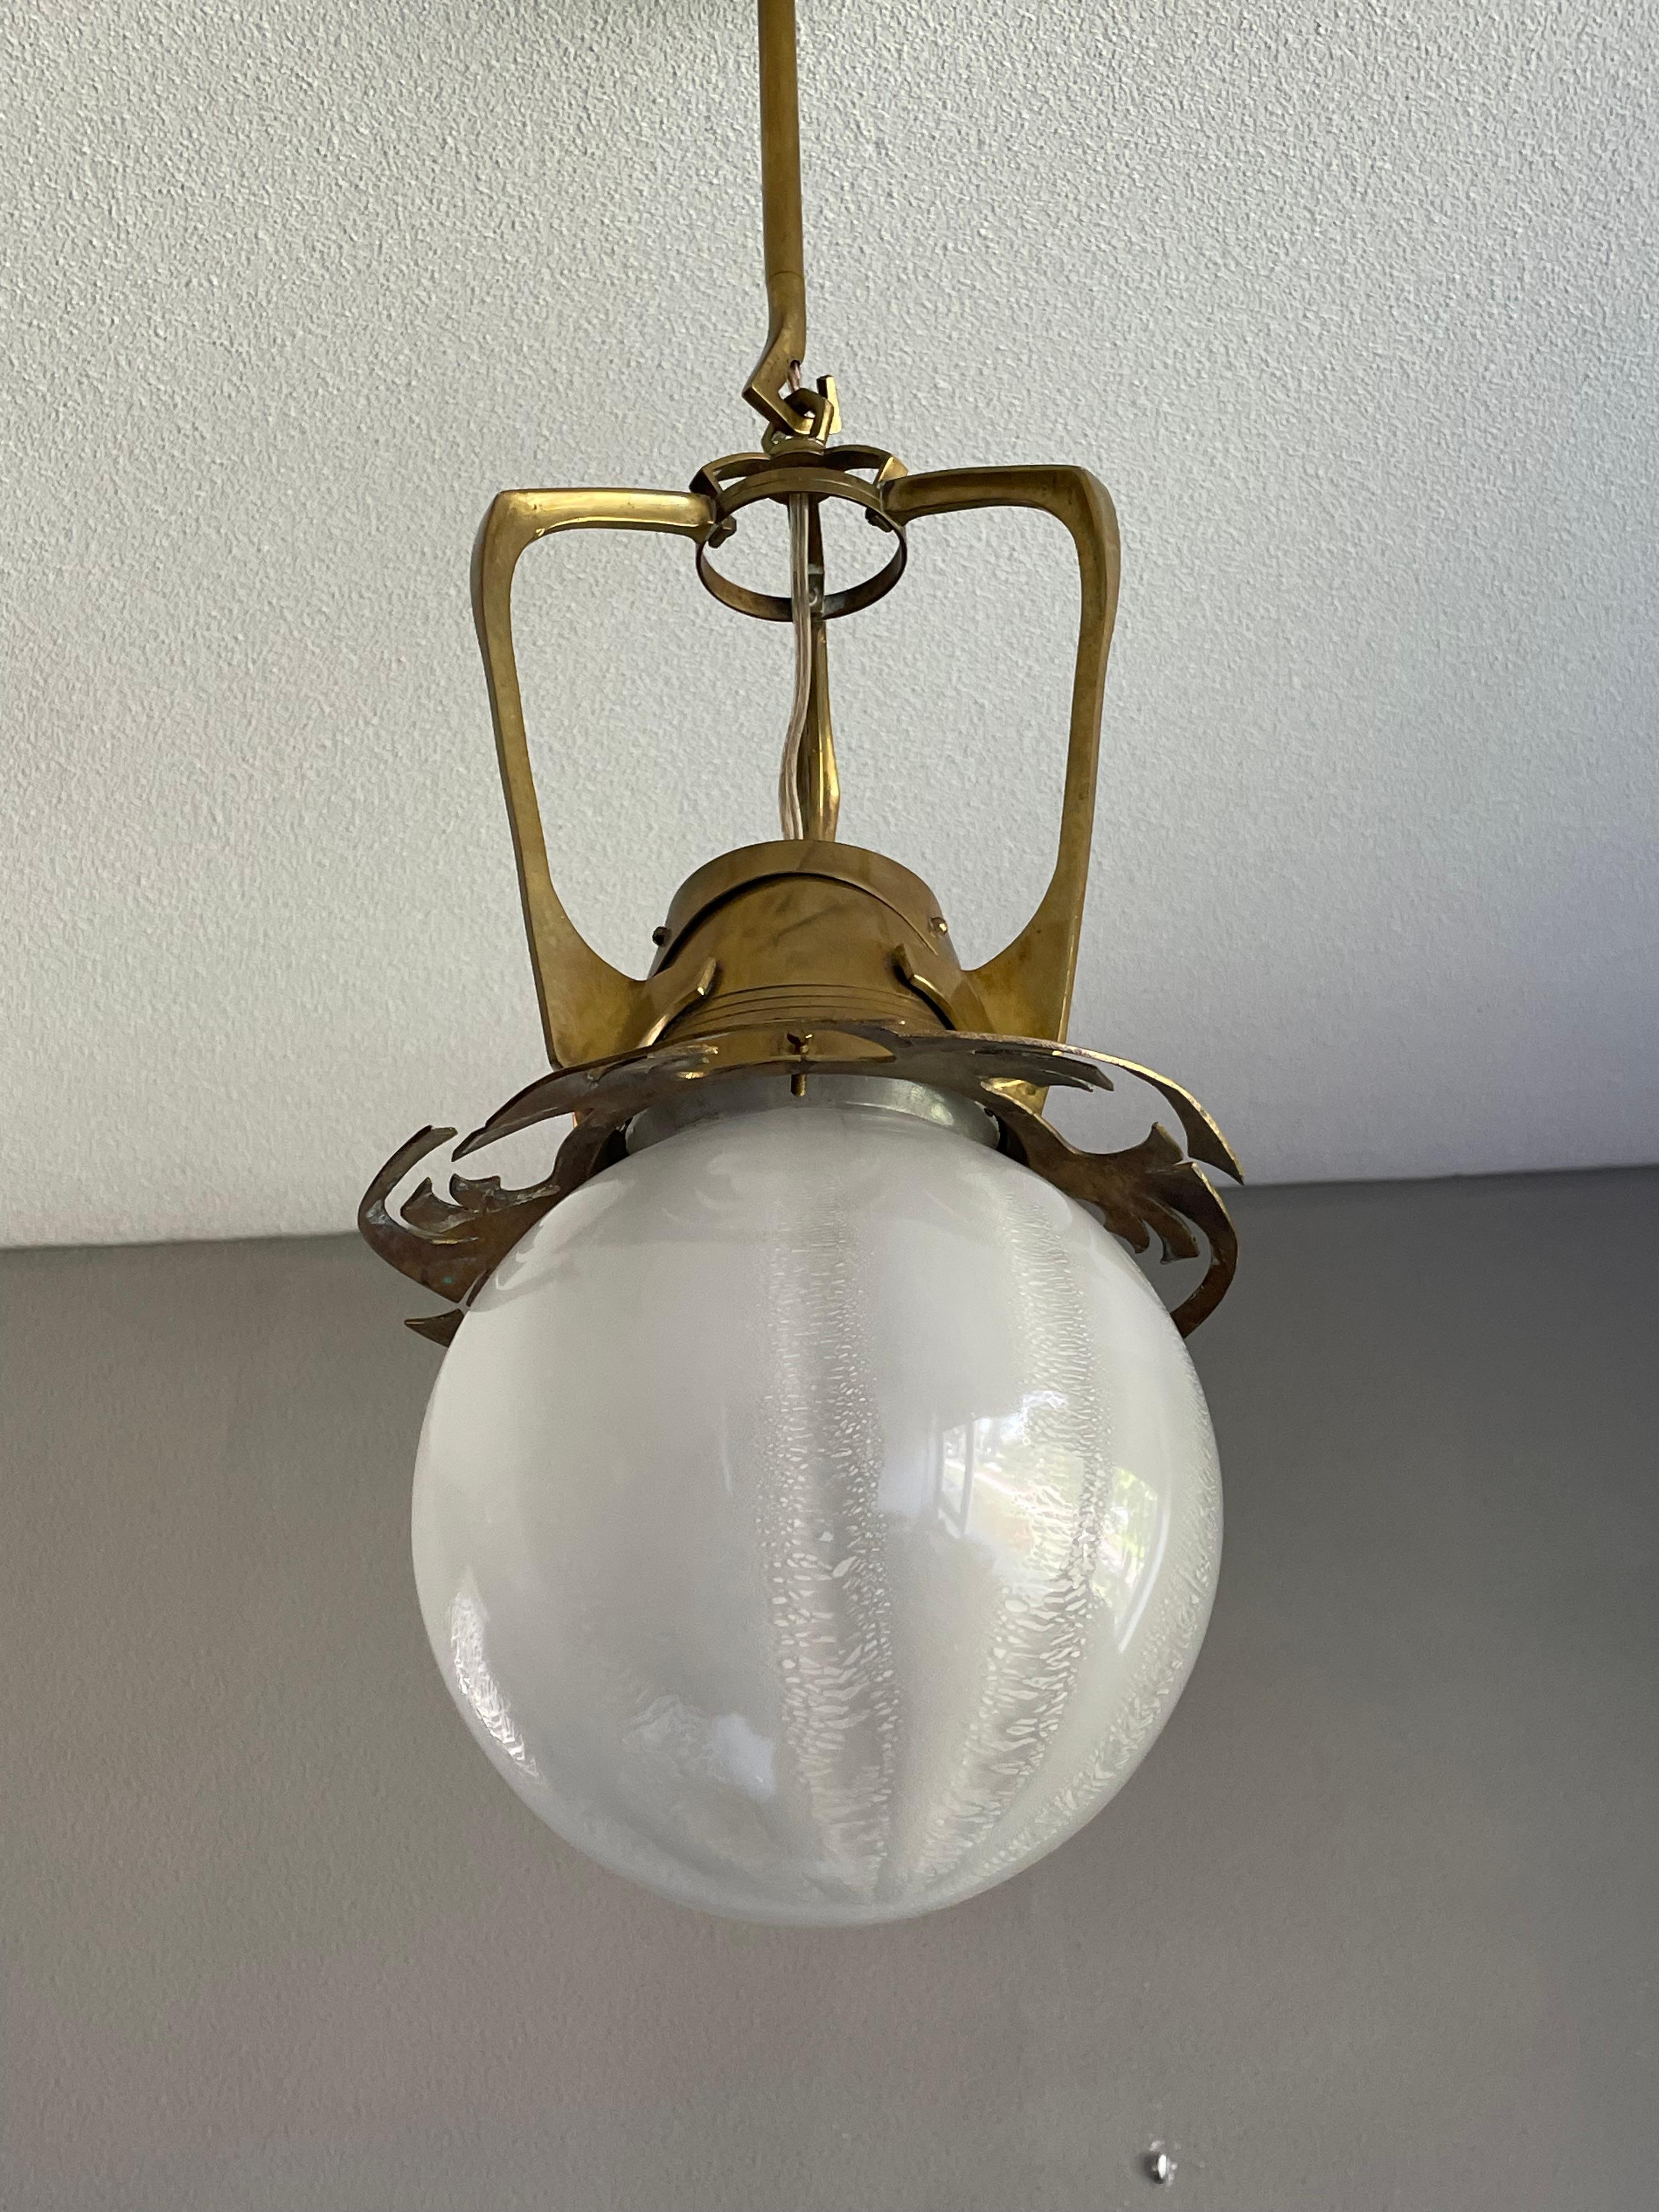 Marvelous design and truly unique Dutch Arts and Crafts pendant.

With early 20th century light fixtures being one of our specialities, finding an Arts and Crafts pendant as unique as this always makes our heart jump. Every designer knows that